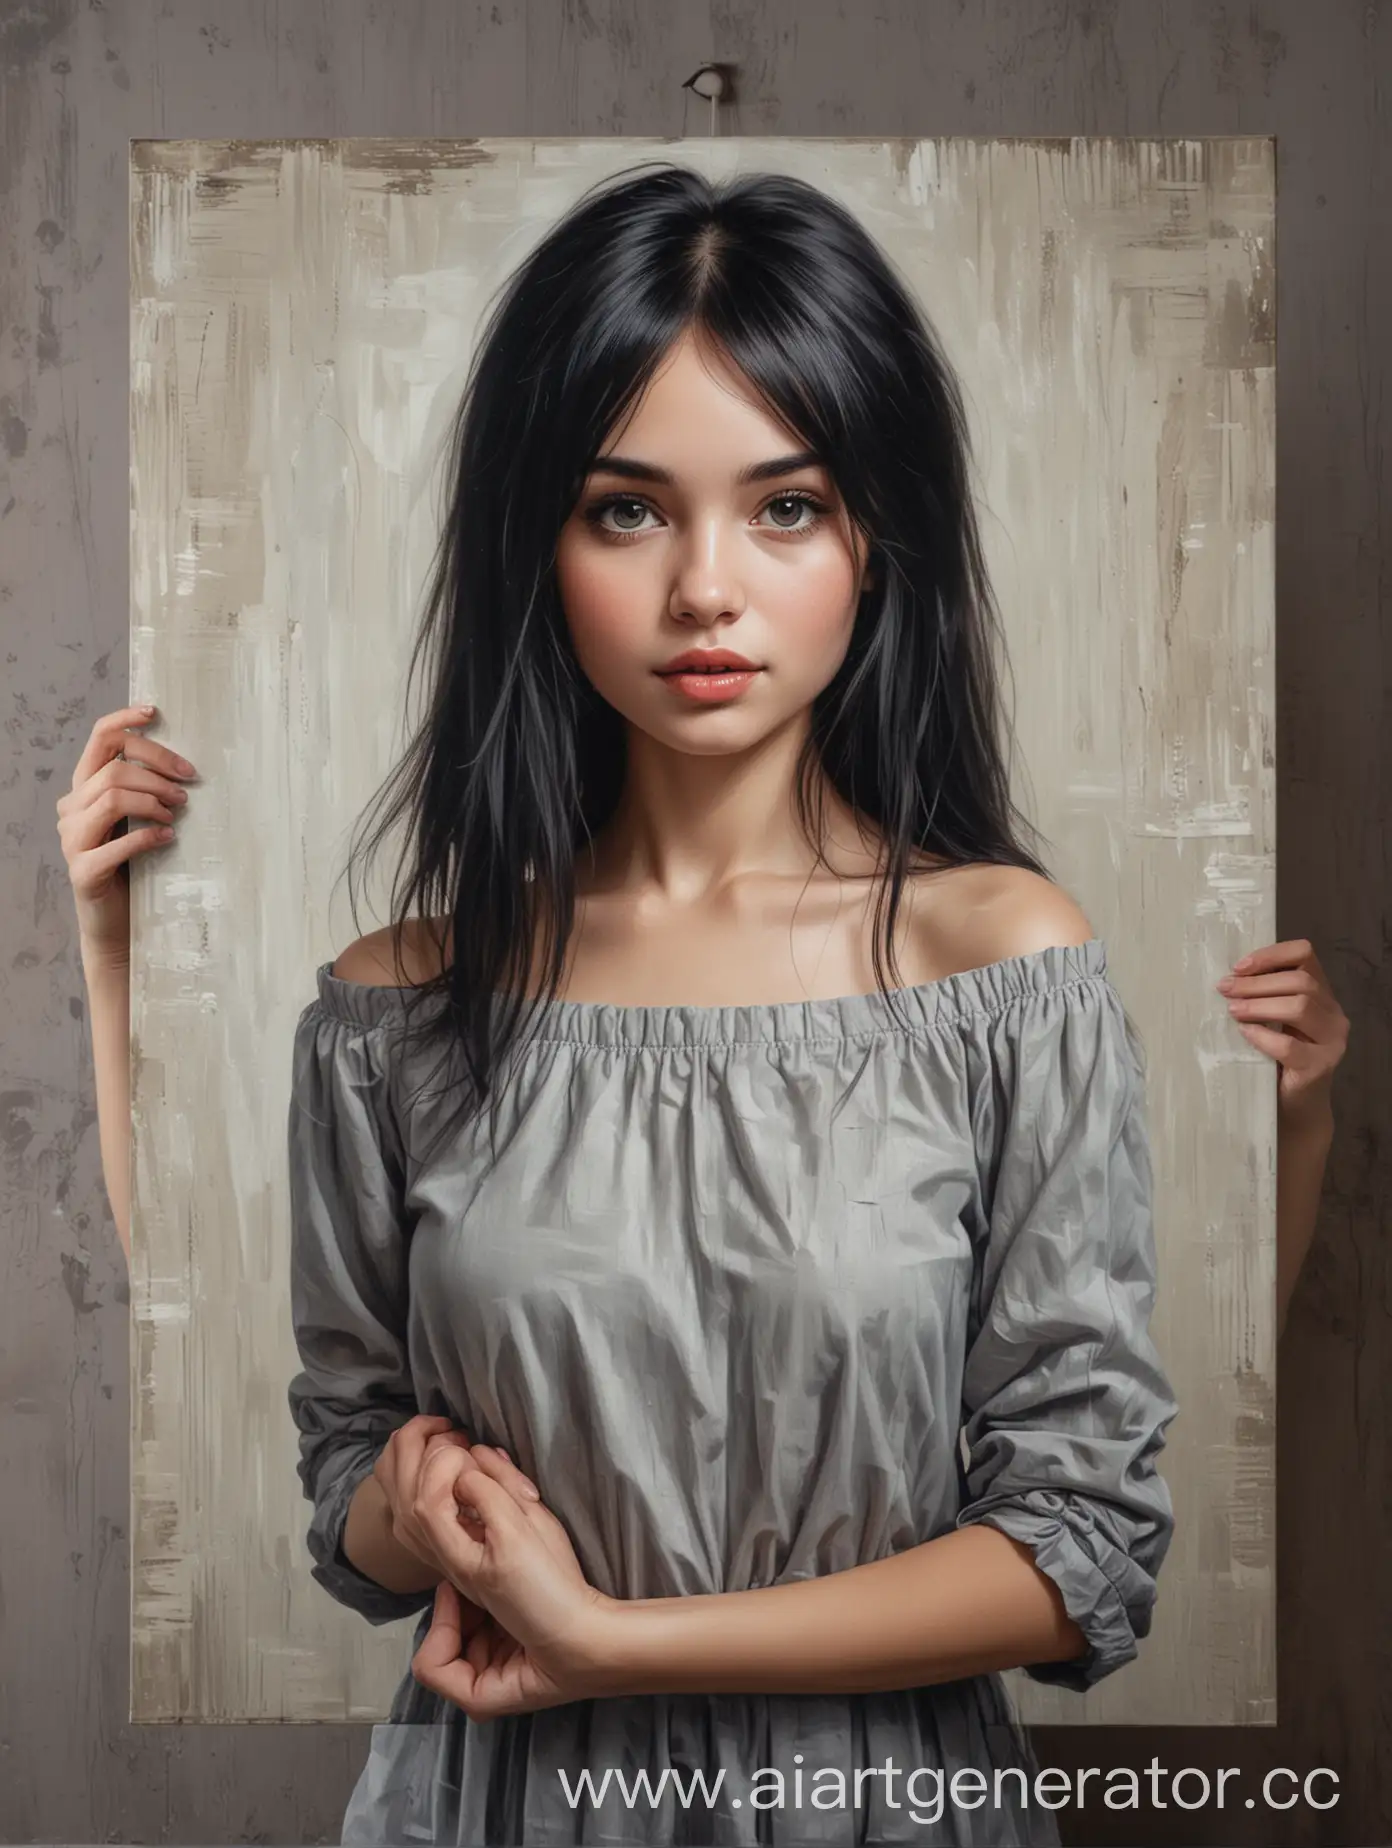 A portrait on canvas measuring 50x70 centimeters is held in the hands of a beautiful slender black-haired girl